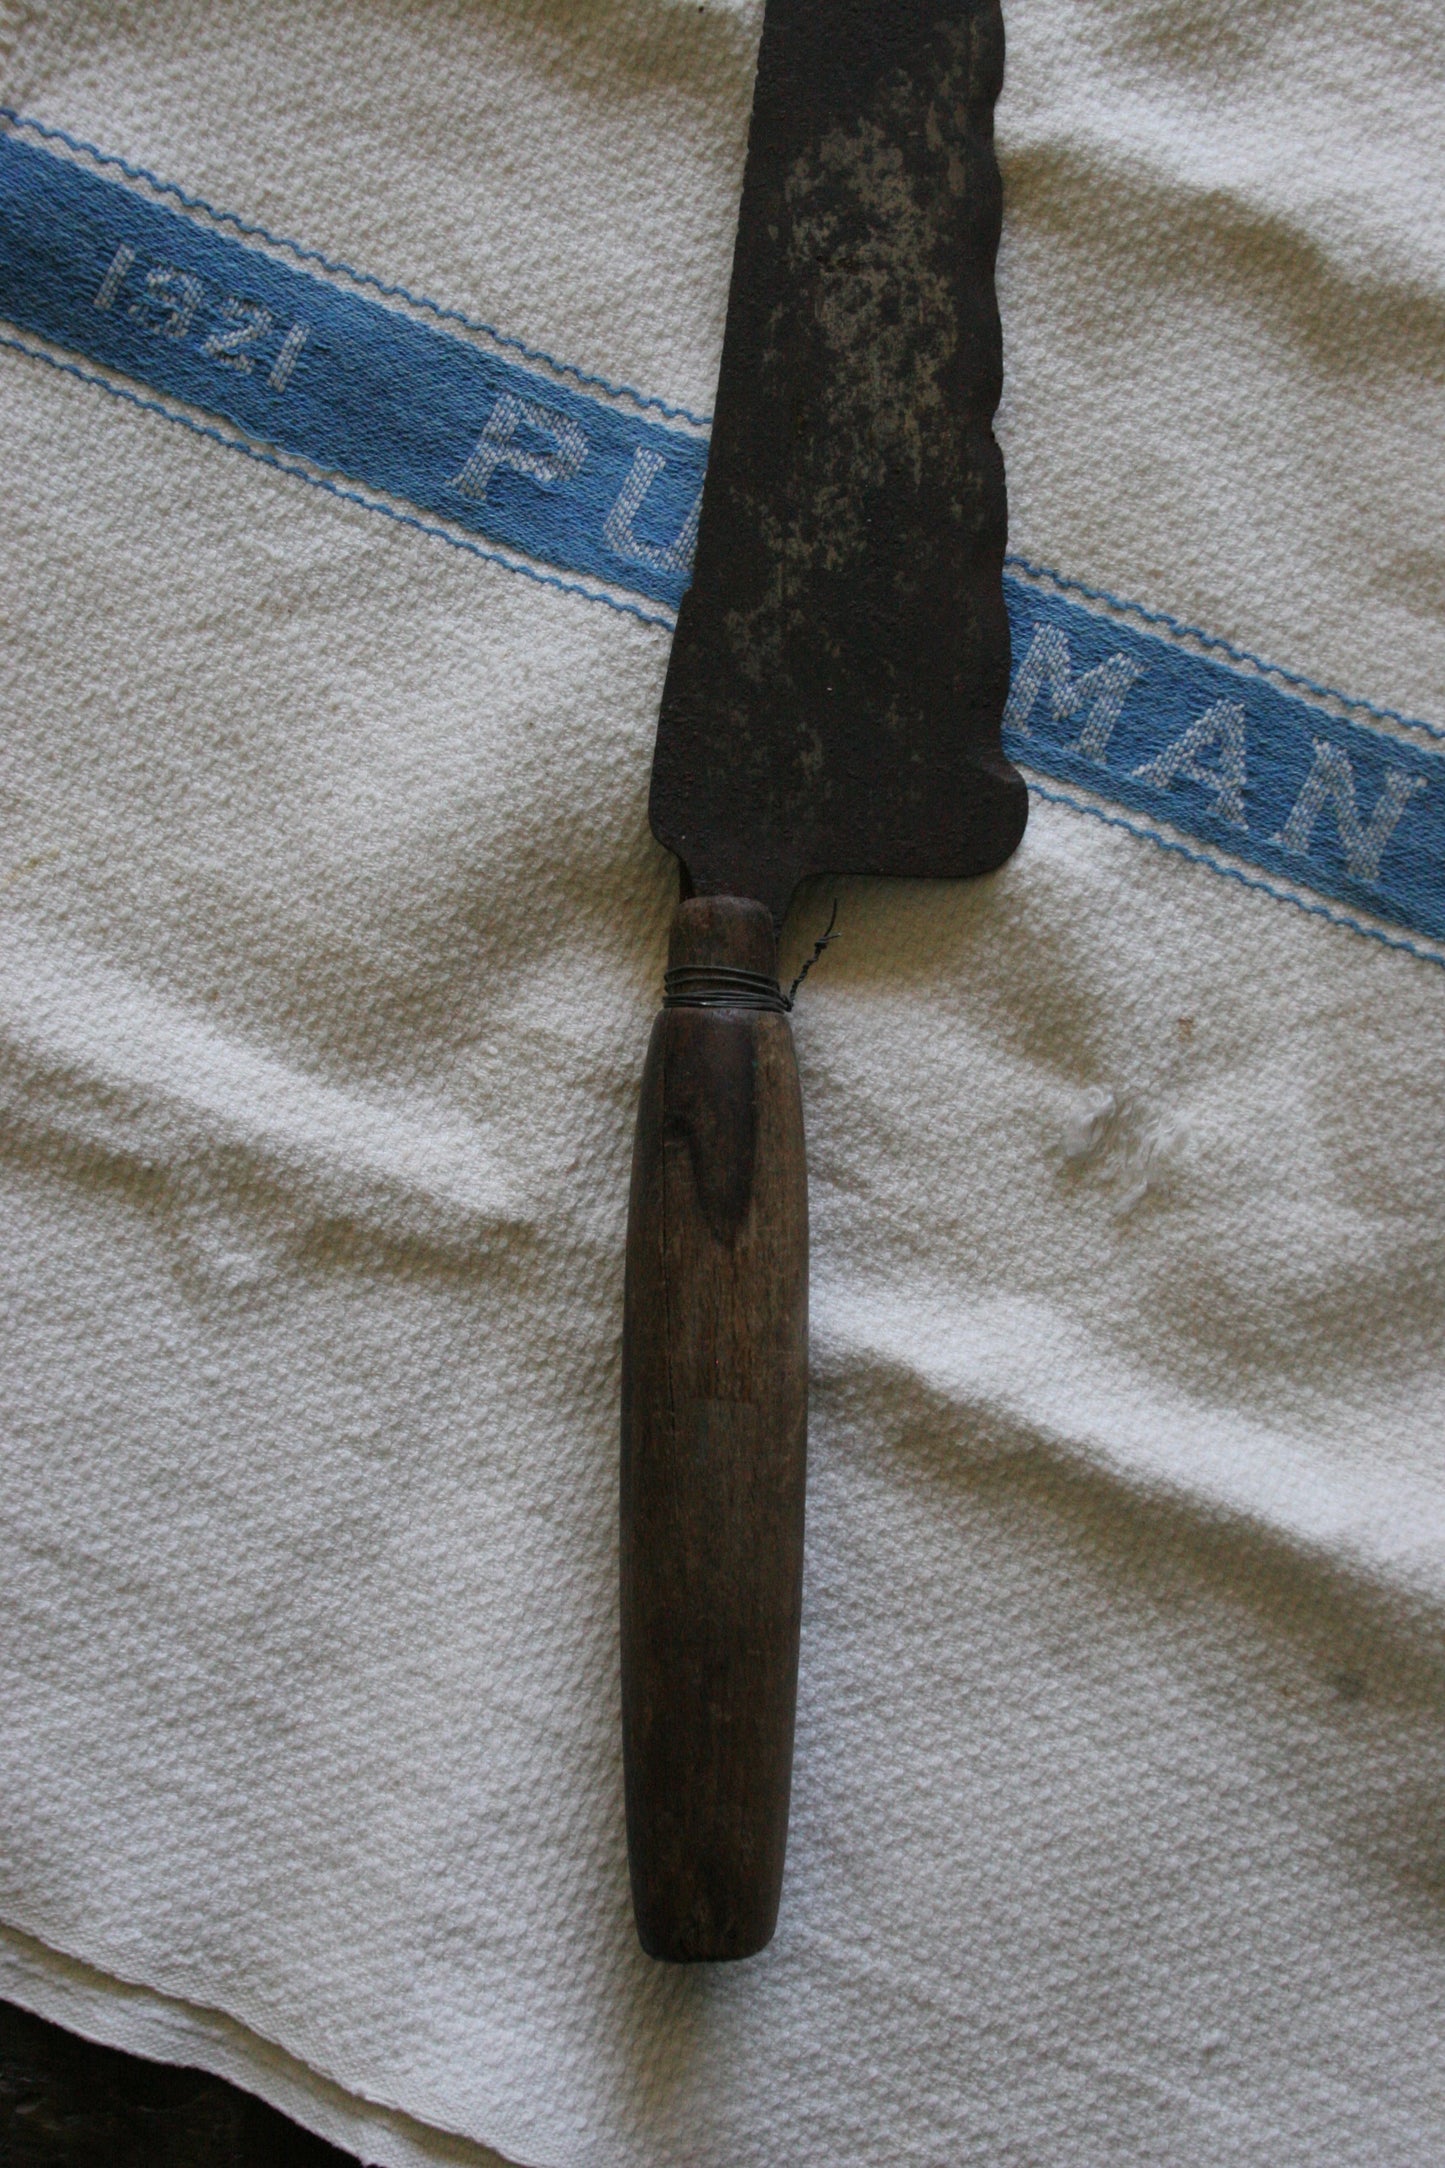 Antique bread knife